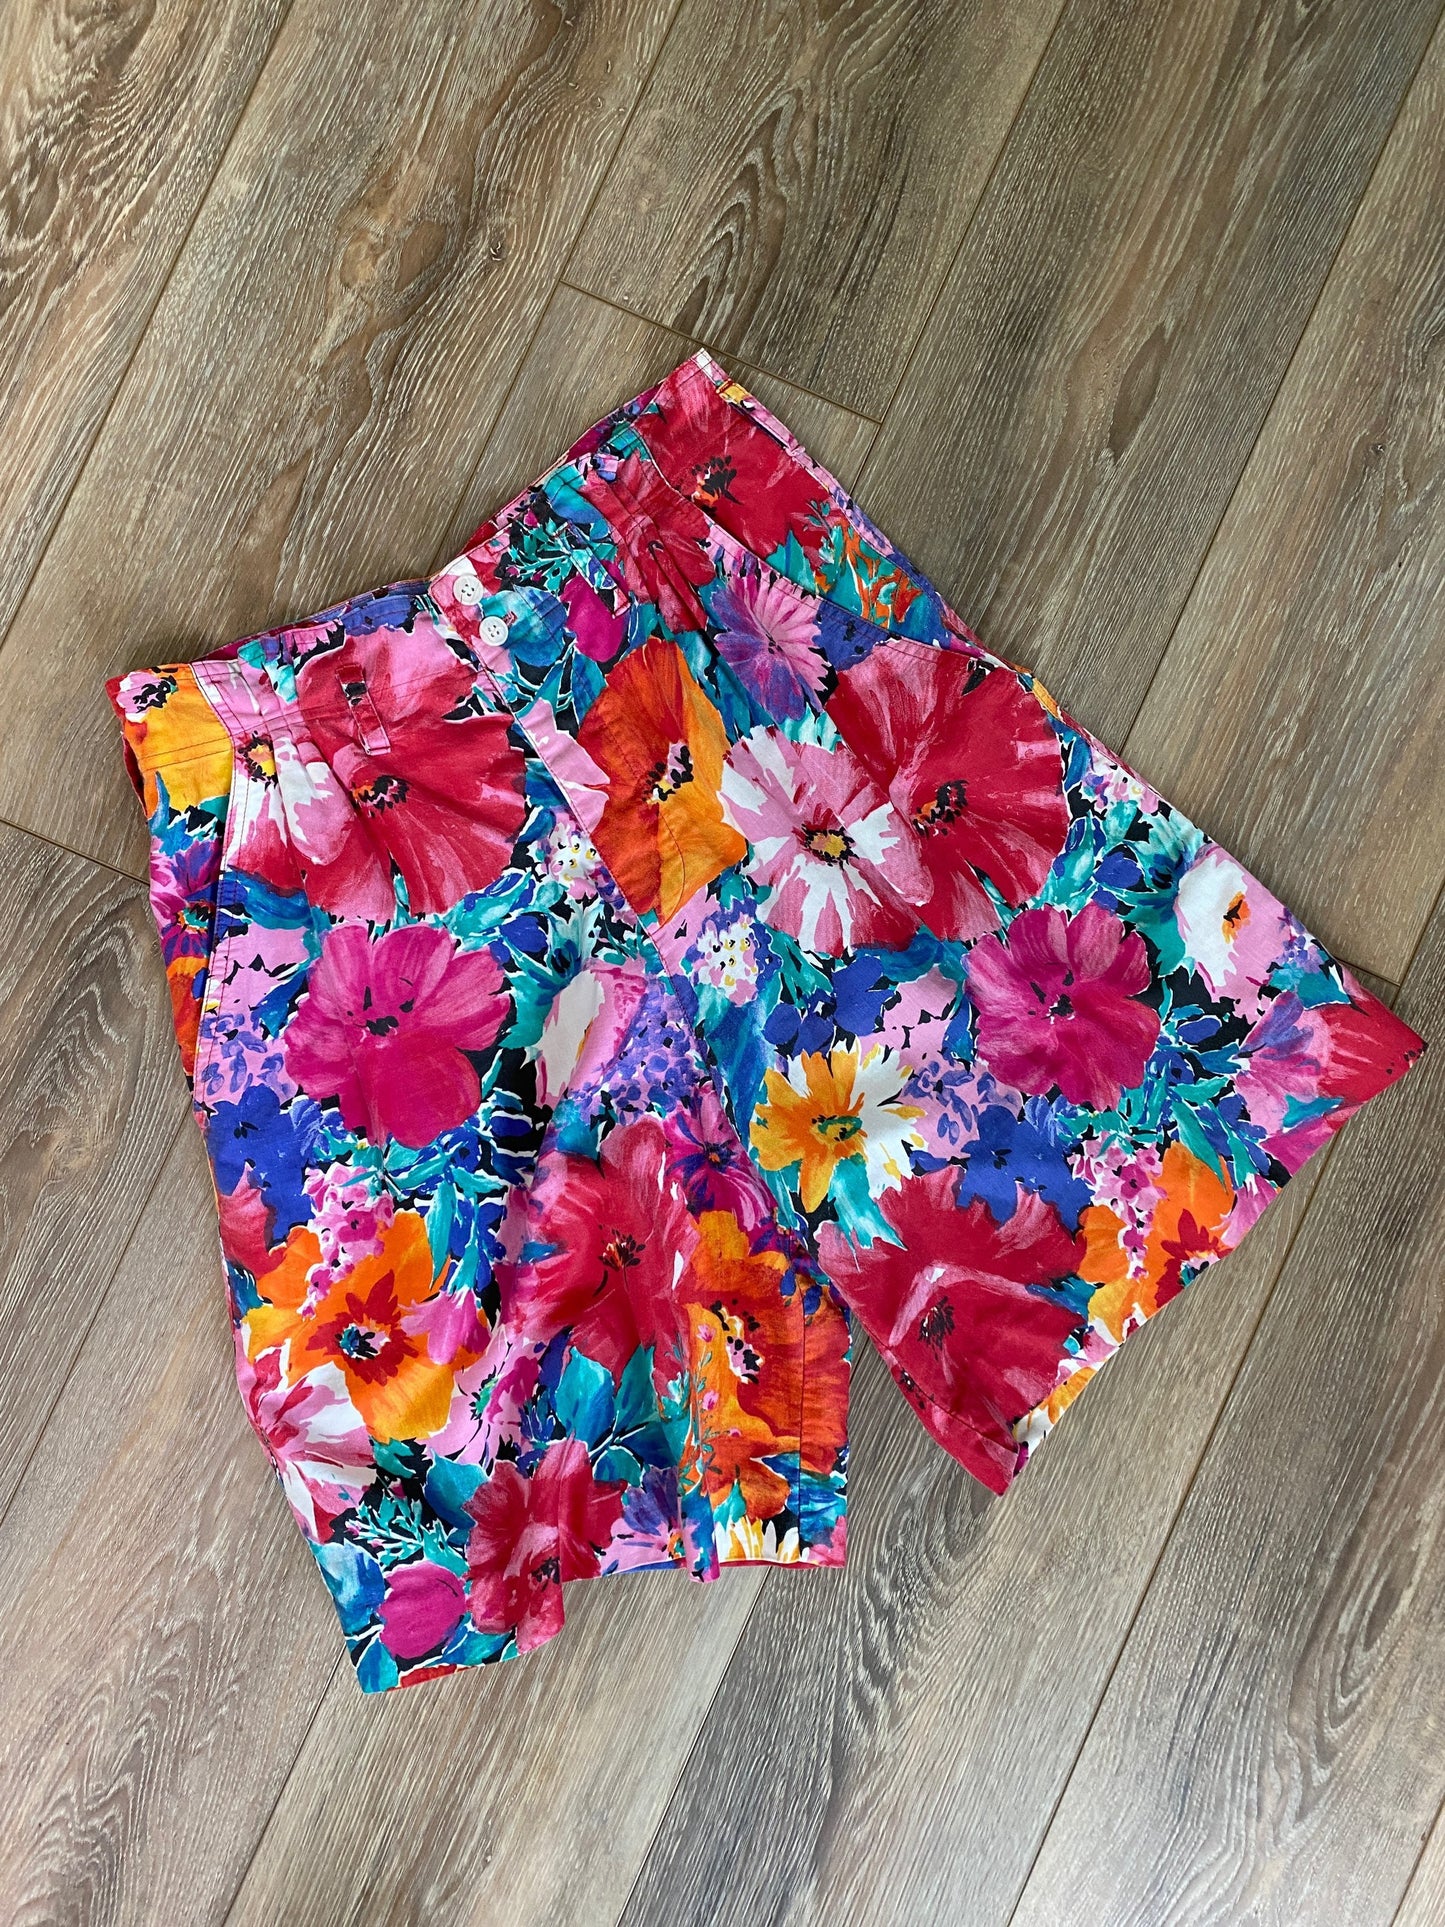 Vintage 1980s Floral High Waisted Shorts / 80s retro button fly cotton paper bag Saks Fifth Avenue shorts / Size M